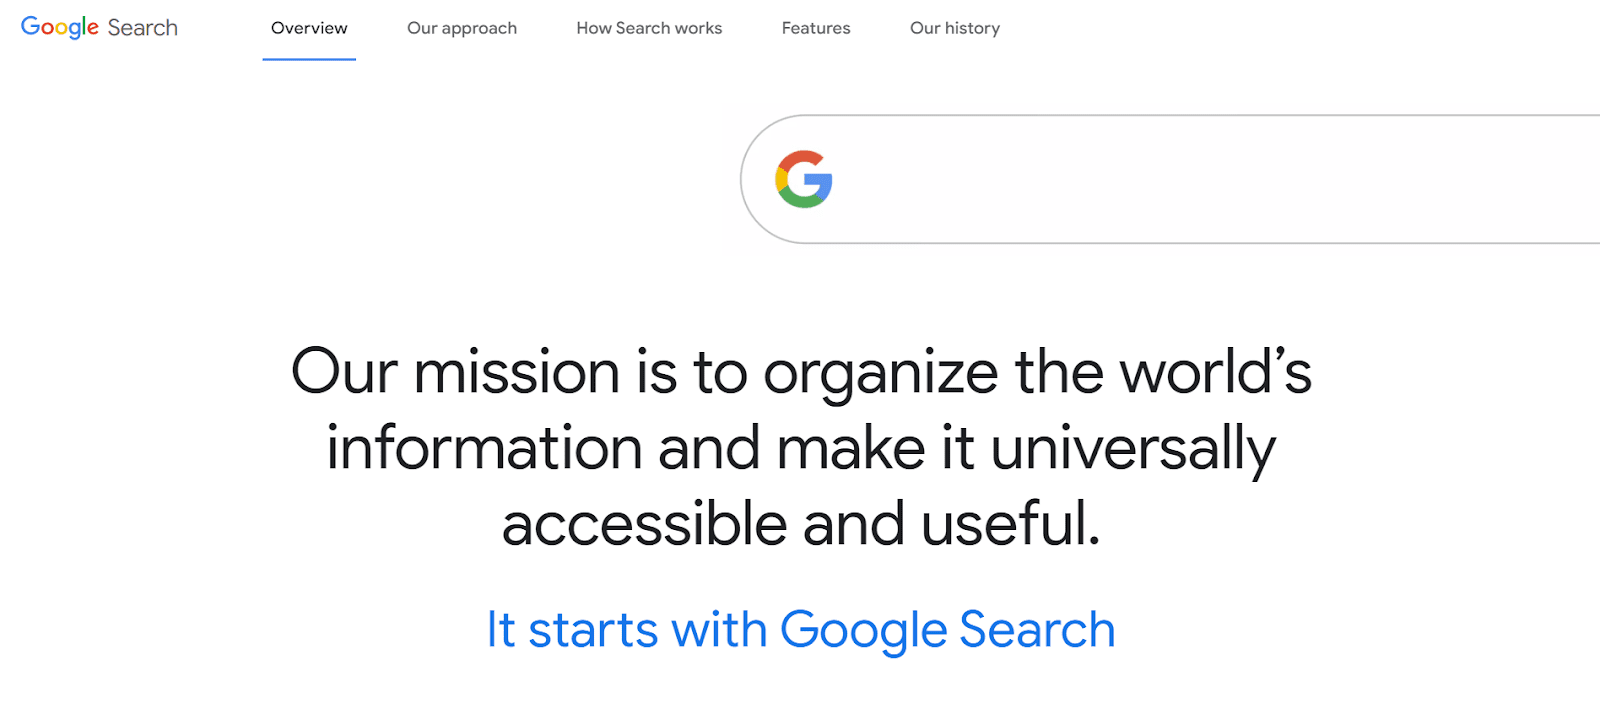 Mission statement example from GoogleIMG name: Google